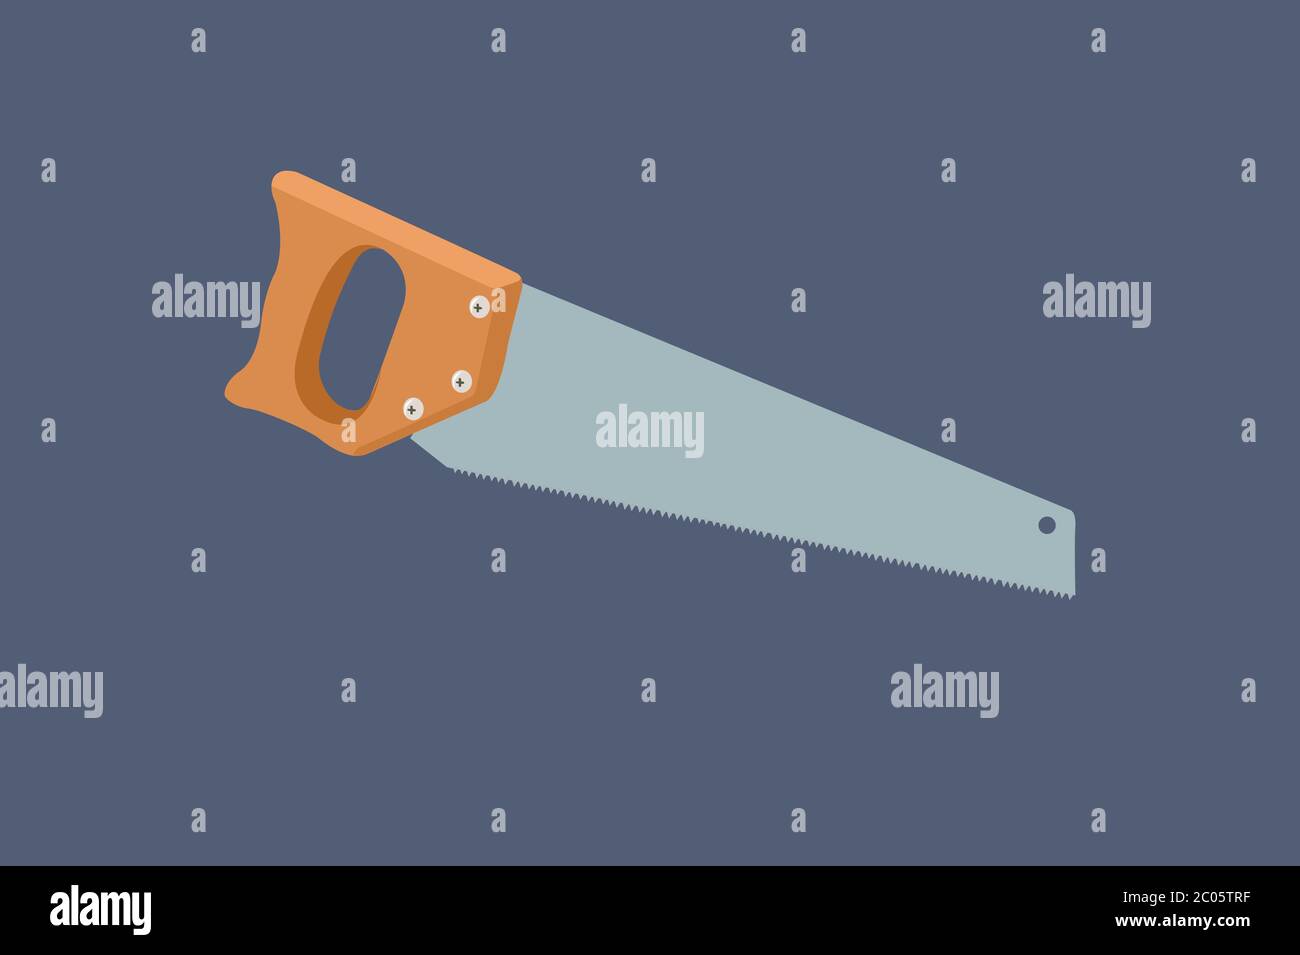 Vector Illustration of a Handsaw Isolated Stock Vector